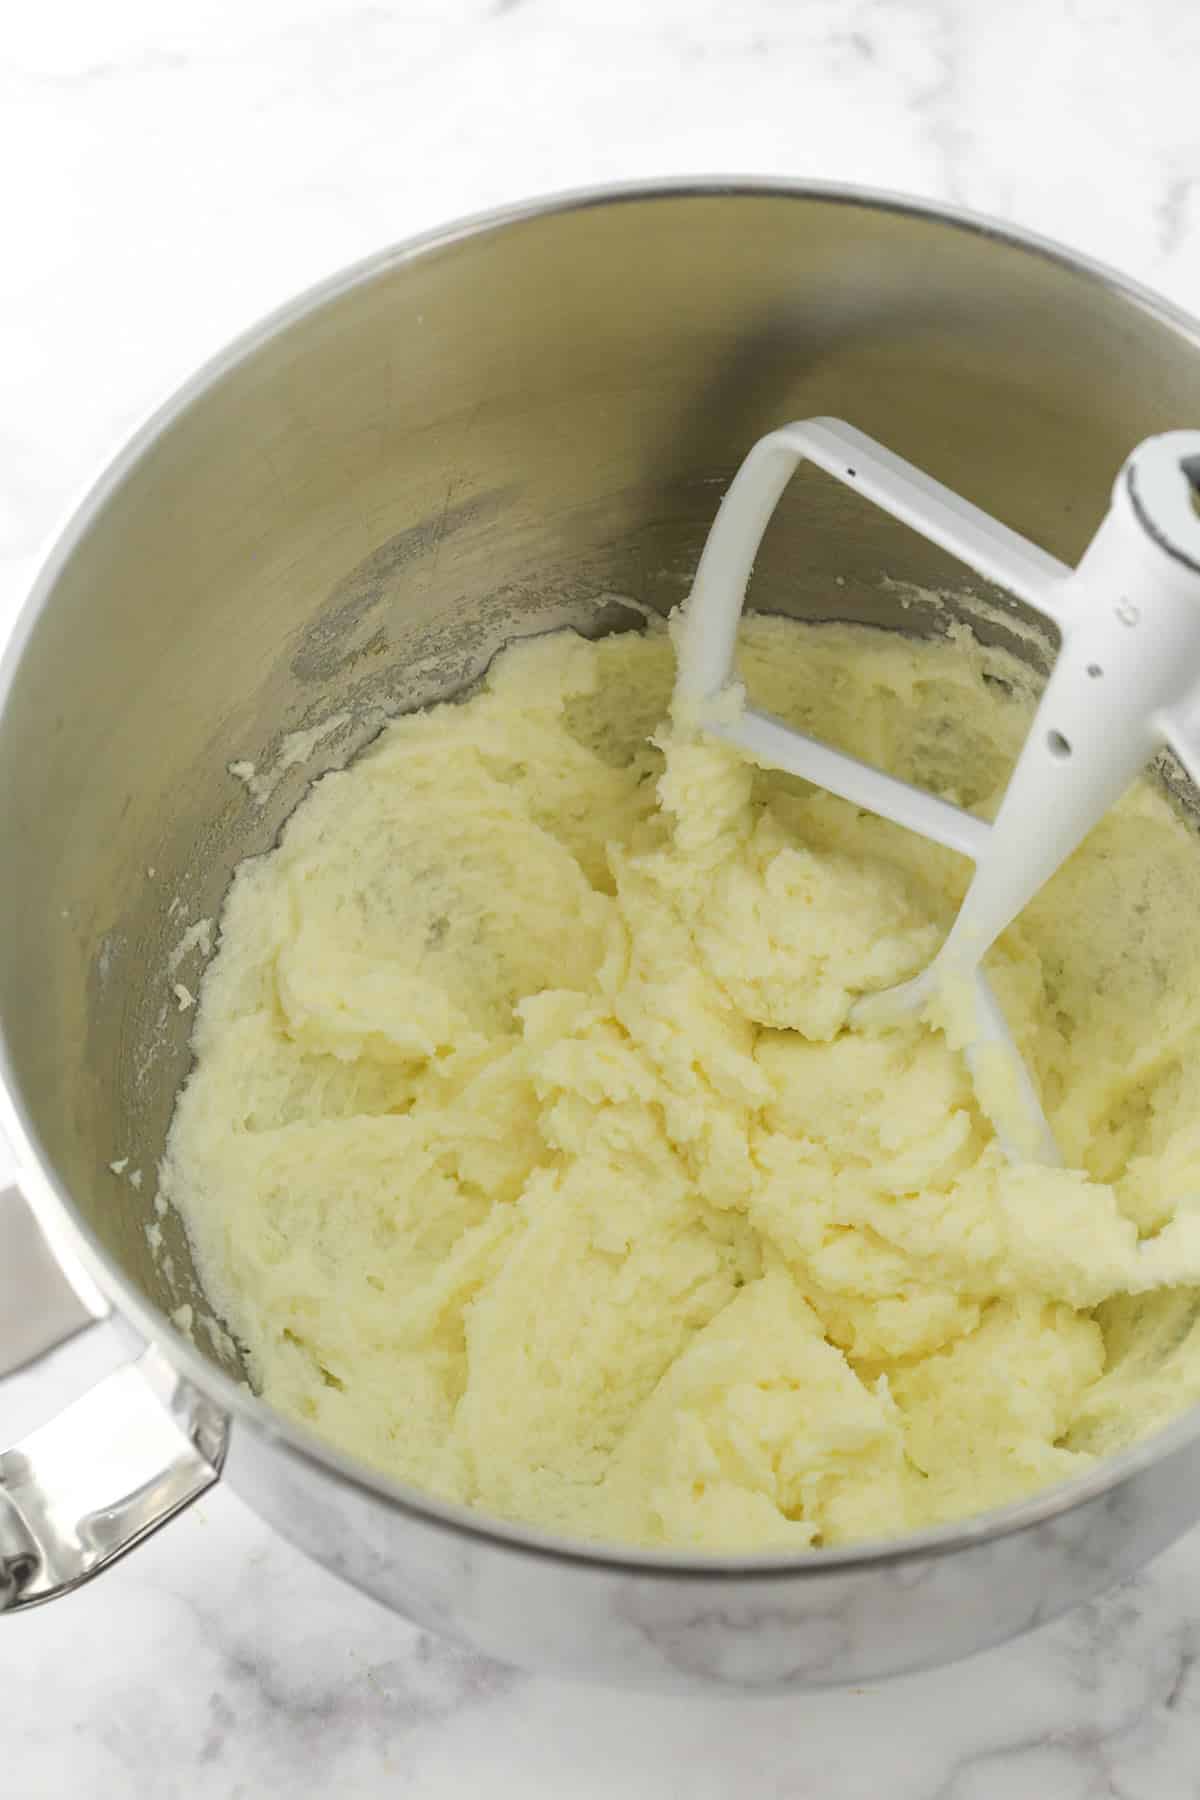 A light and fluffy butter, sugar and egg mixture in a metal bowl